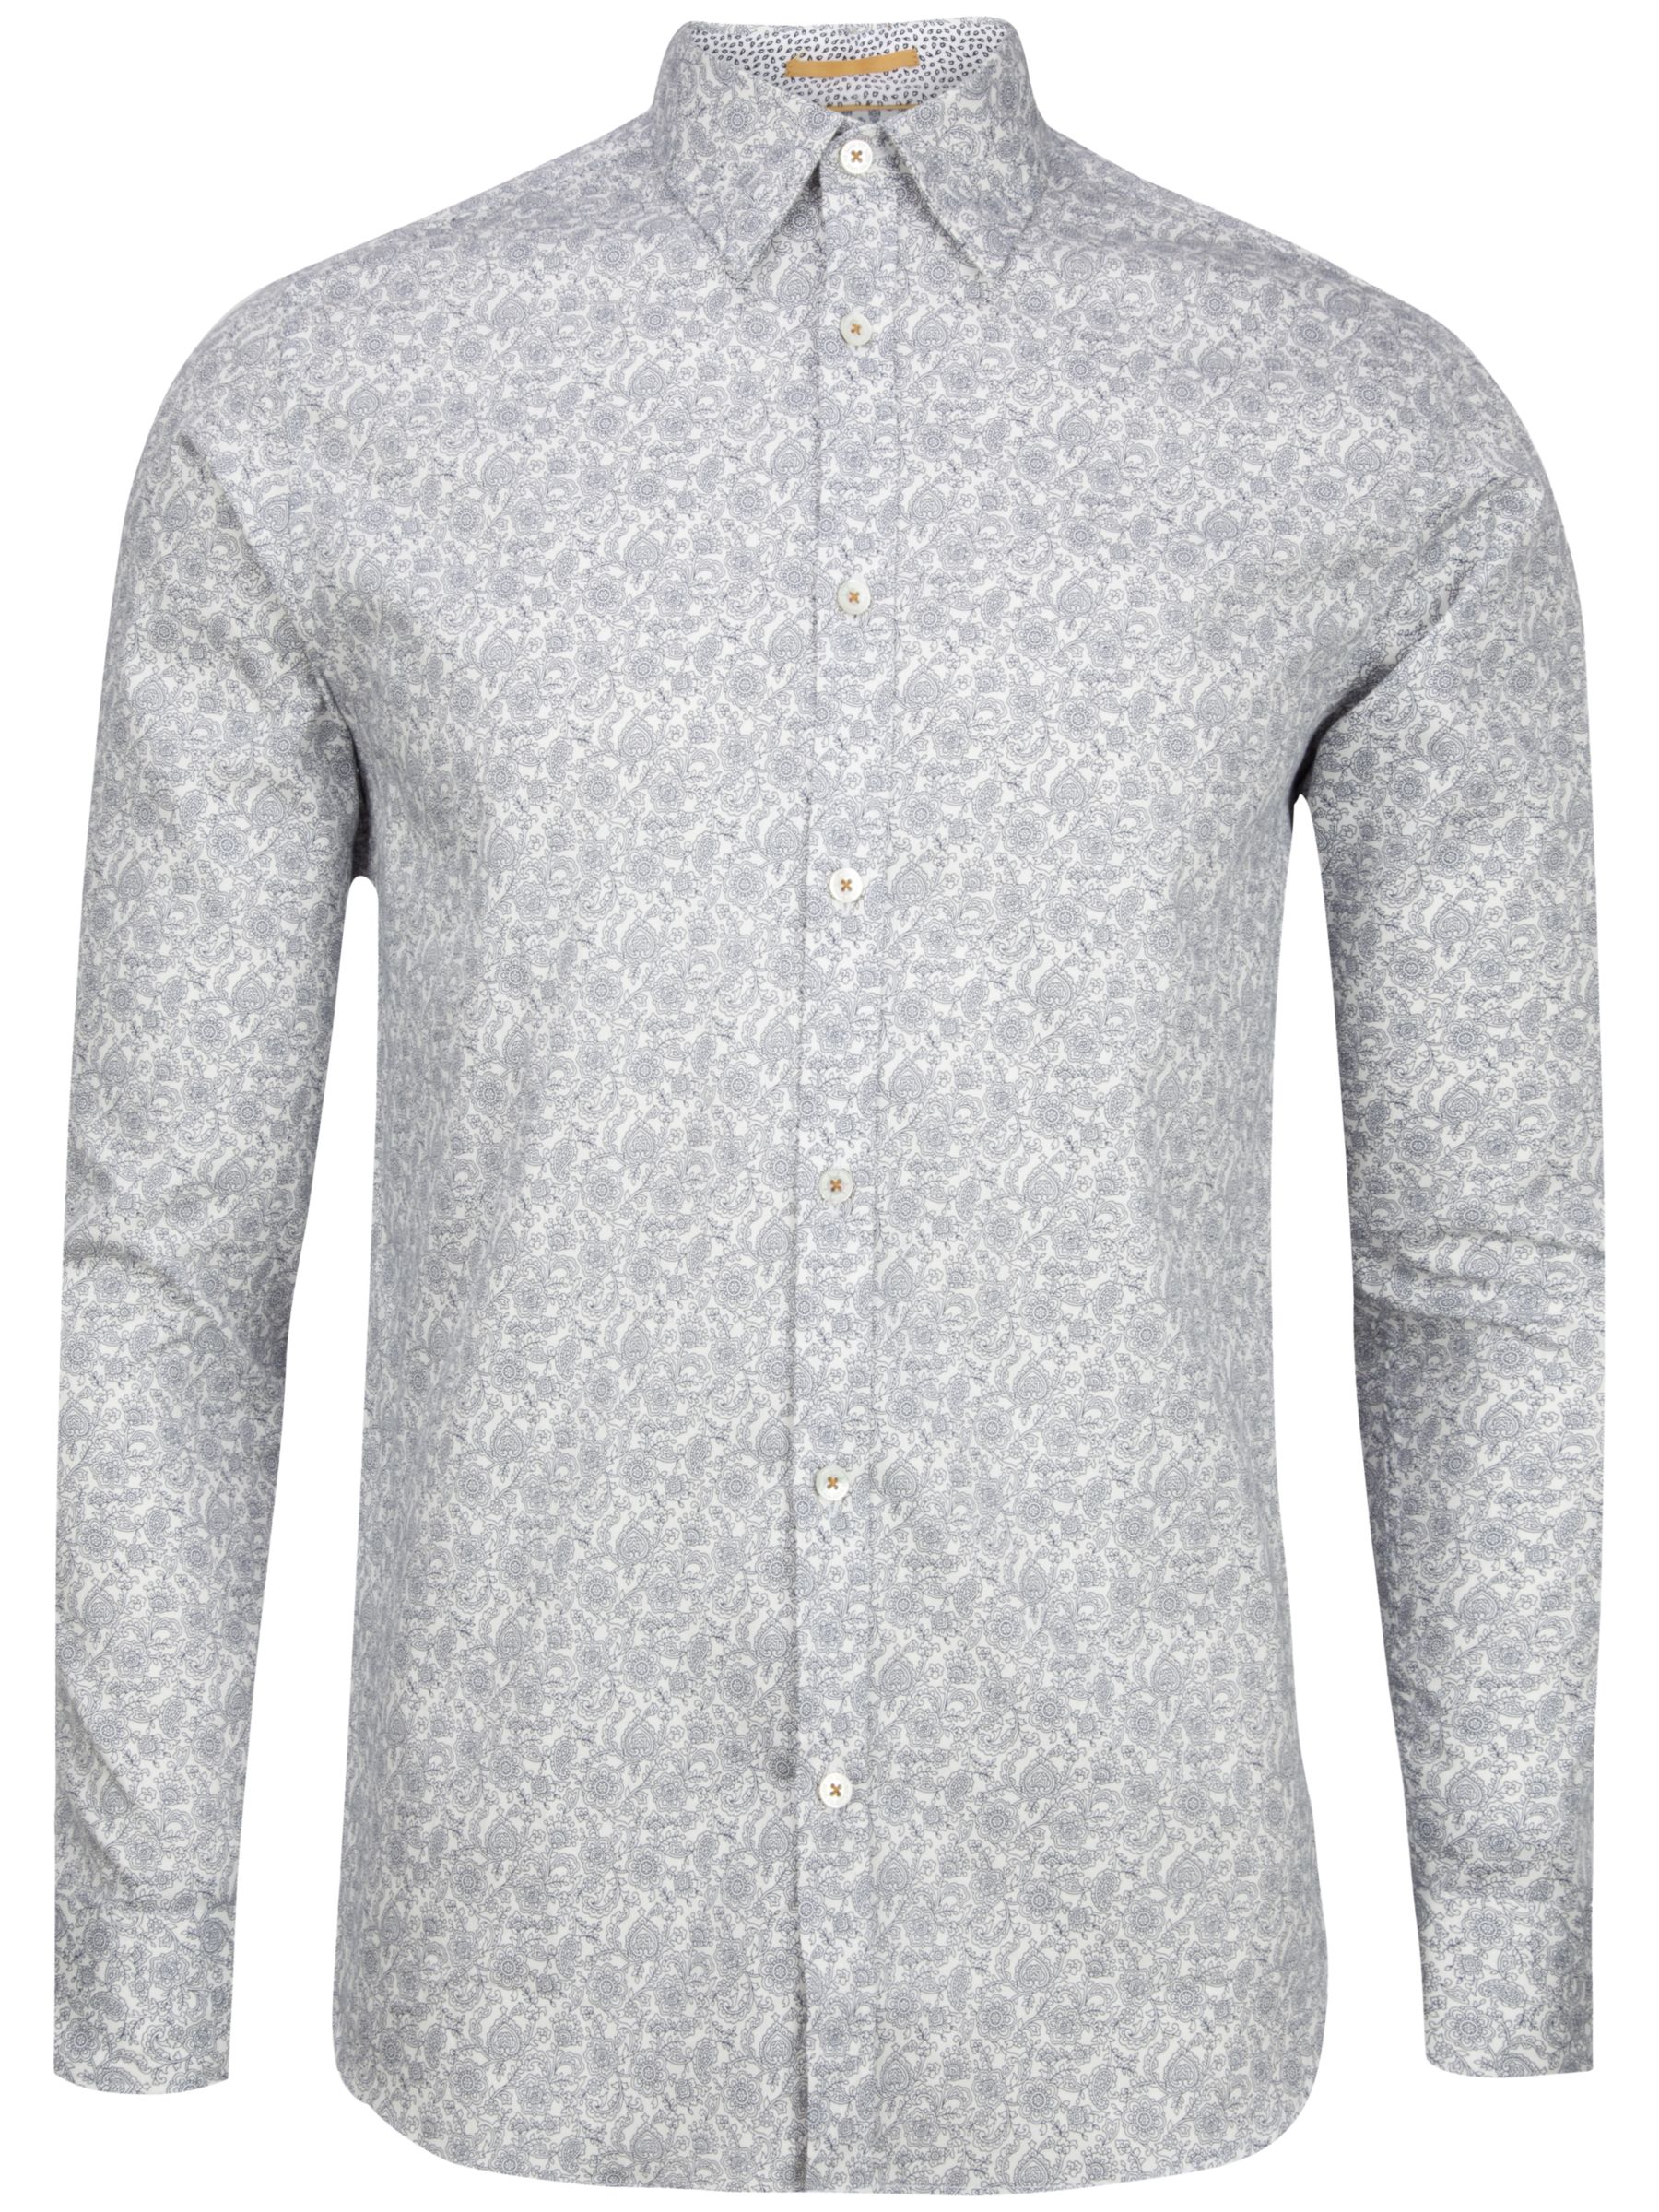 Ted Baker Florall Floral Print Long Sleeve Shirt, White, 2